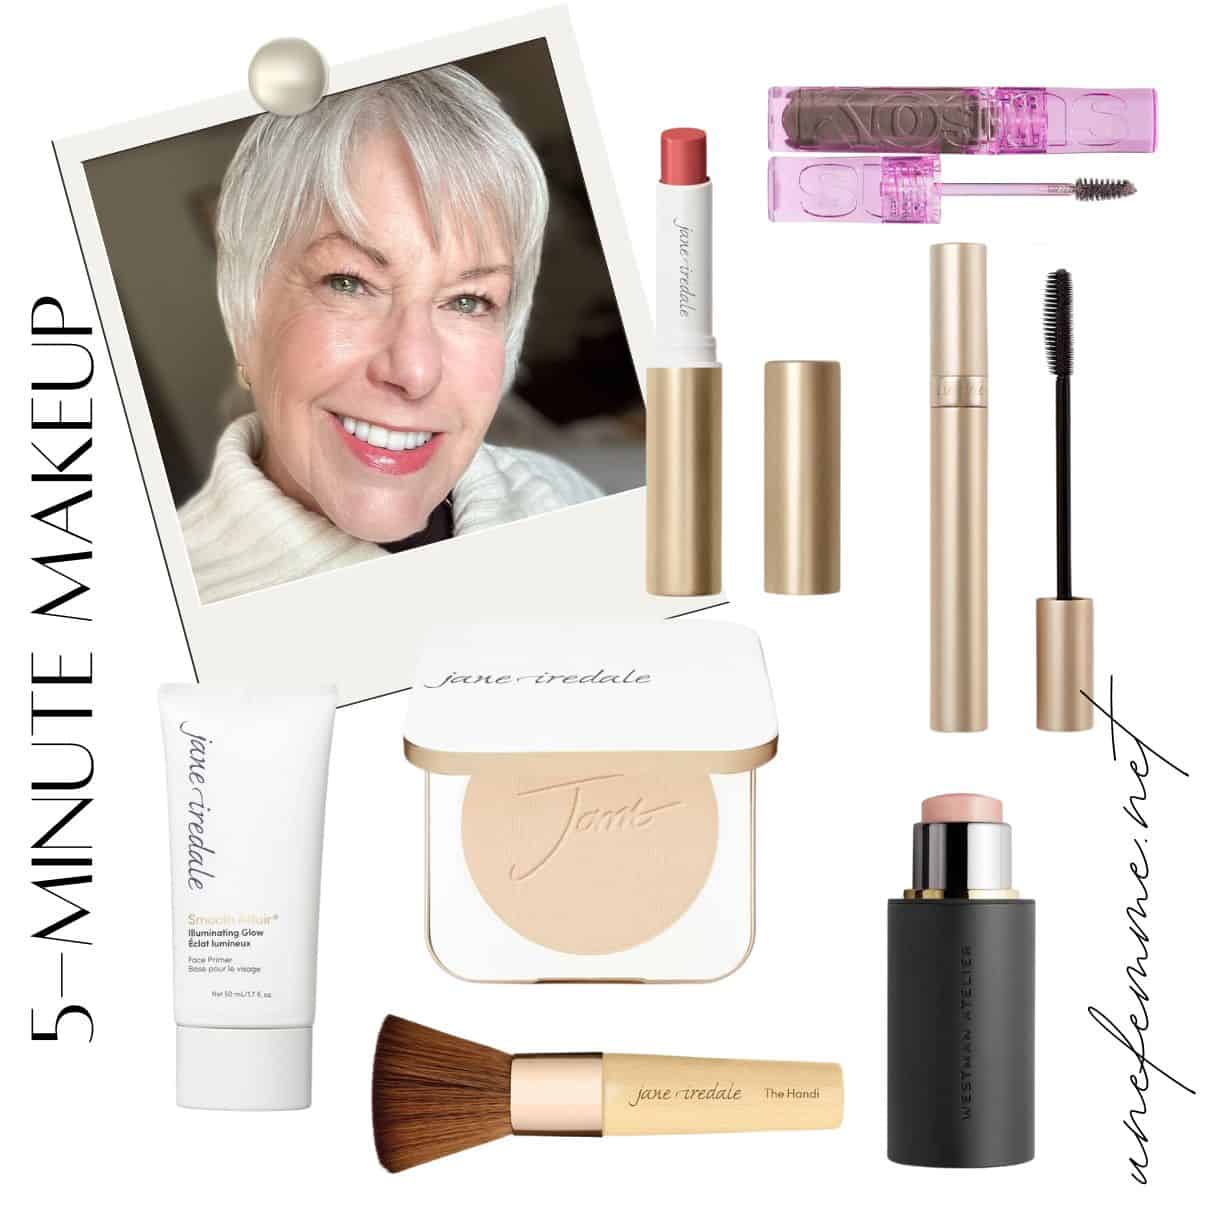 My 5-minute, “no makeup look” for mature skin